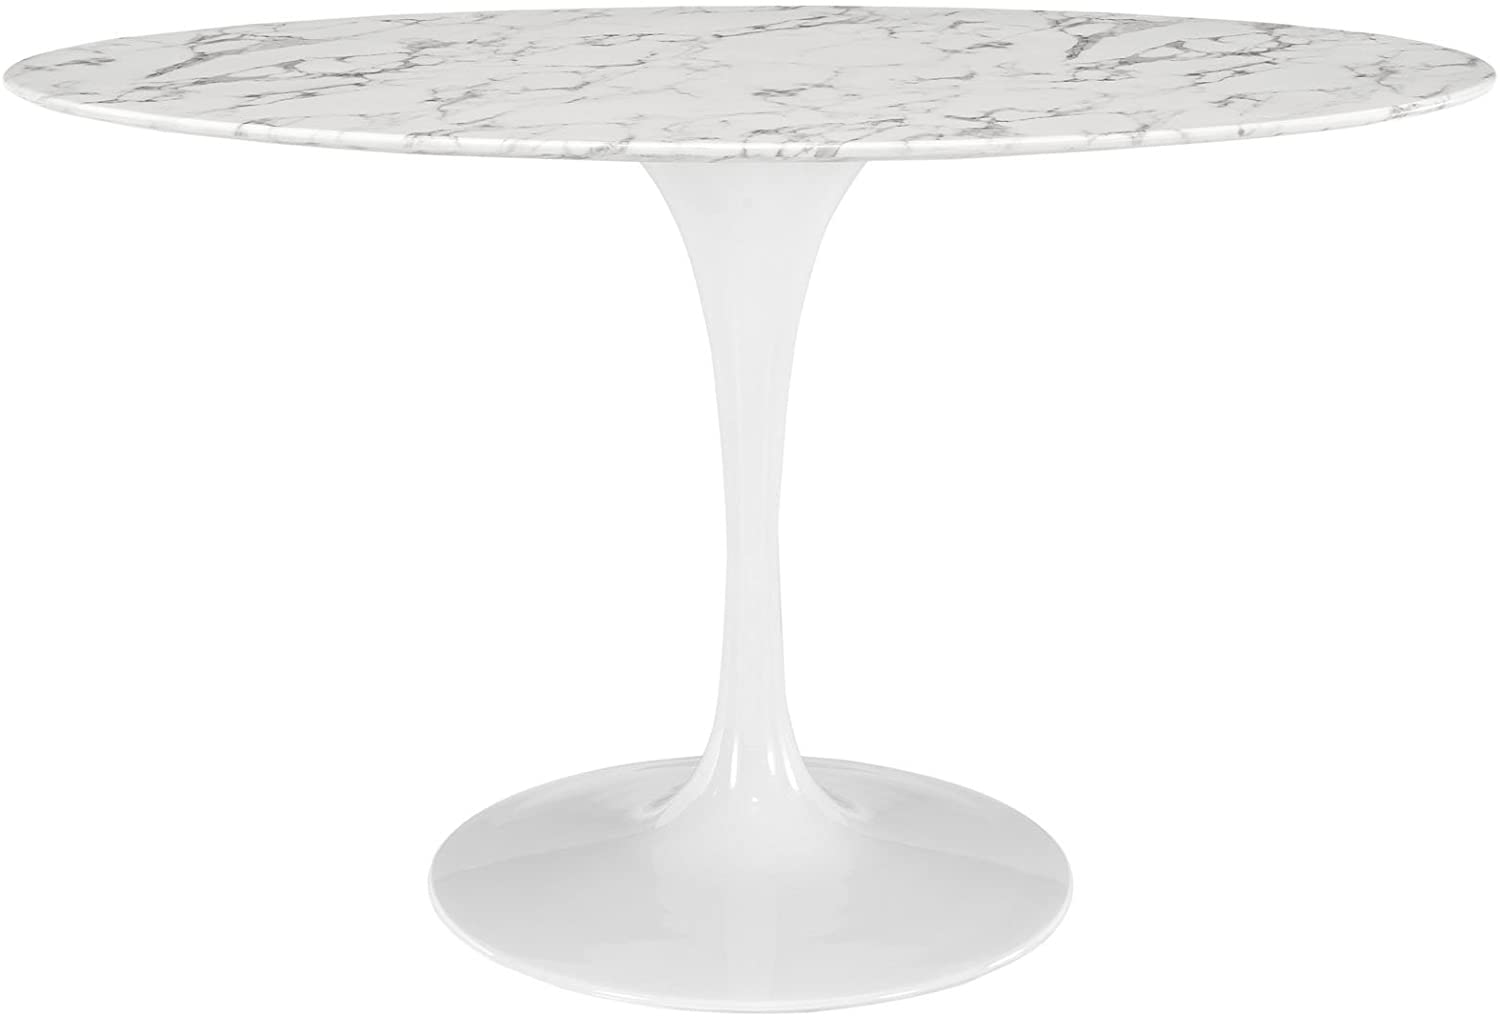 B00IJUL0RA Modway Lippa 54" Oval-Shaped Mid-Century Modern Dining Table with Artificial Marble Top and White Base